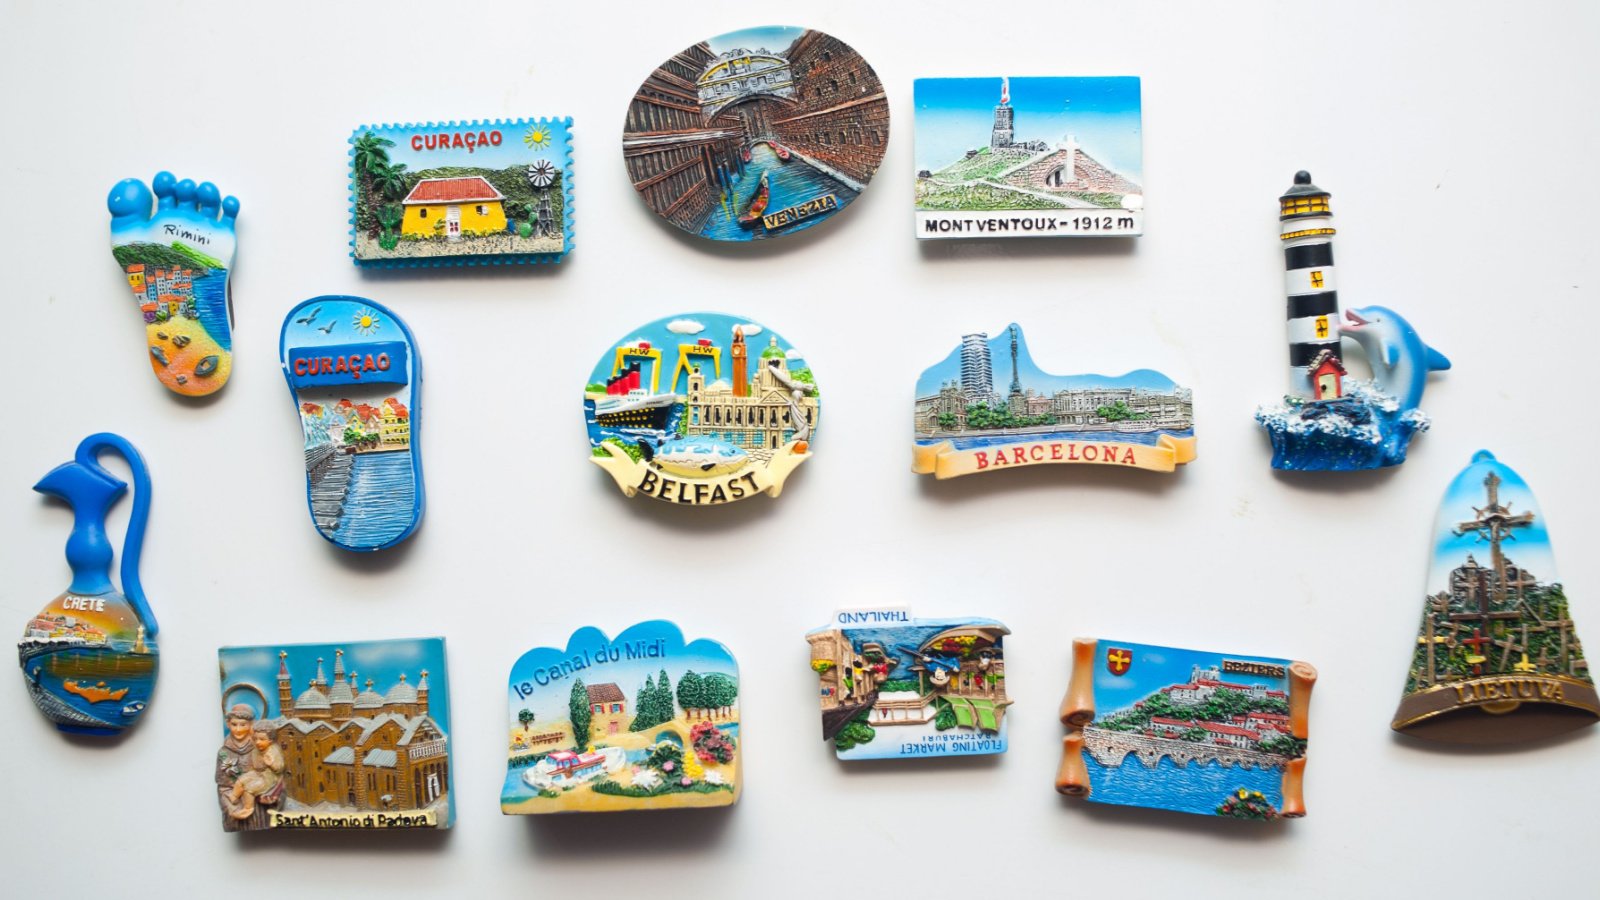 <p>Some might find buying little souvenirs from other countries a little tacky. But if buying a fridge magnet from each place you visit makes you happy, who cares what the travel police think? It reminds you of where you’ve been and helps you keep special memories of your trips close to your heart.</p>